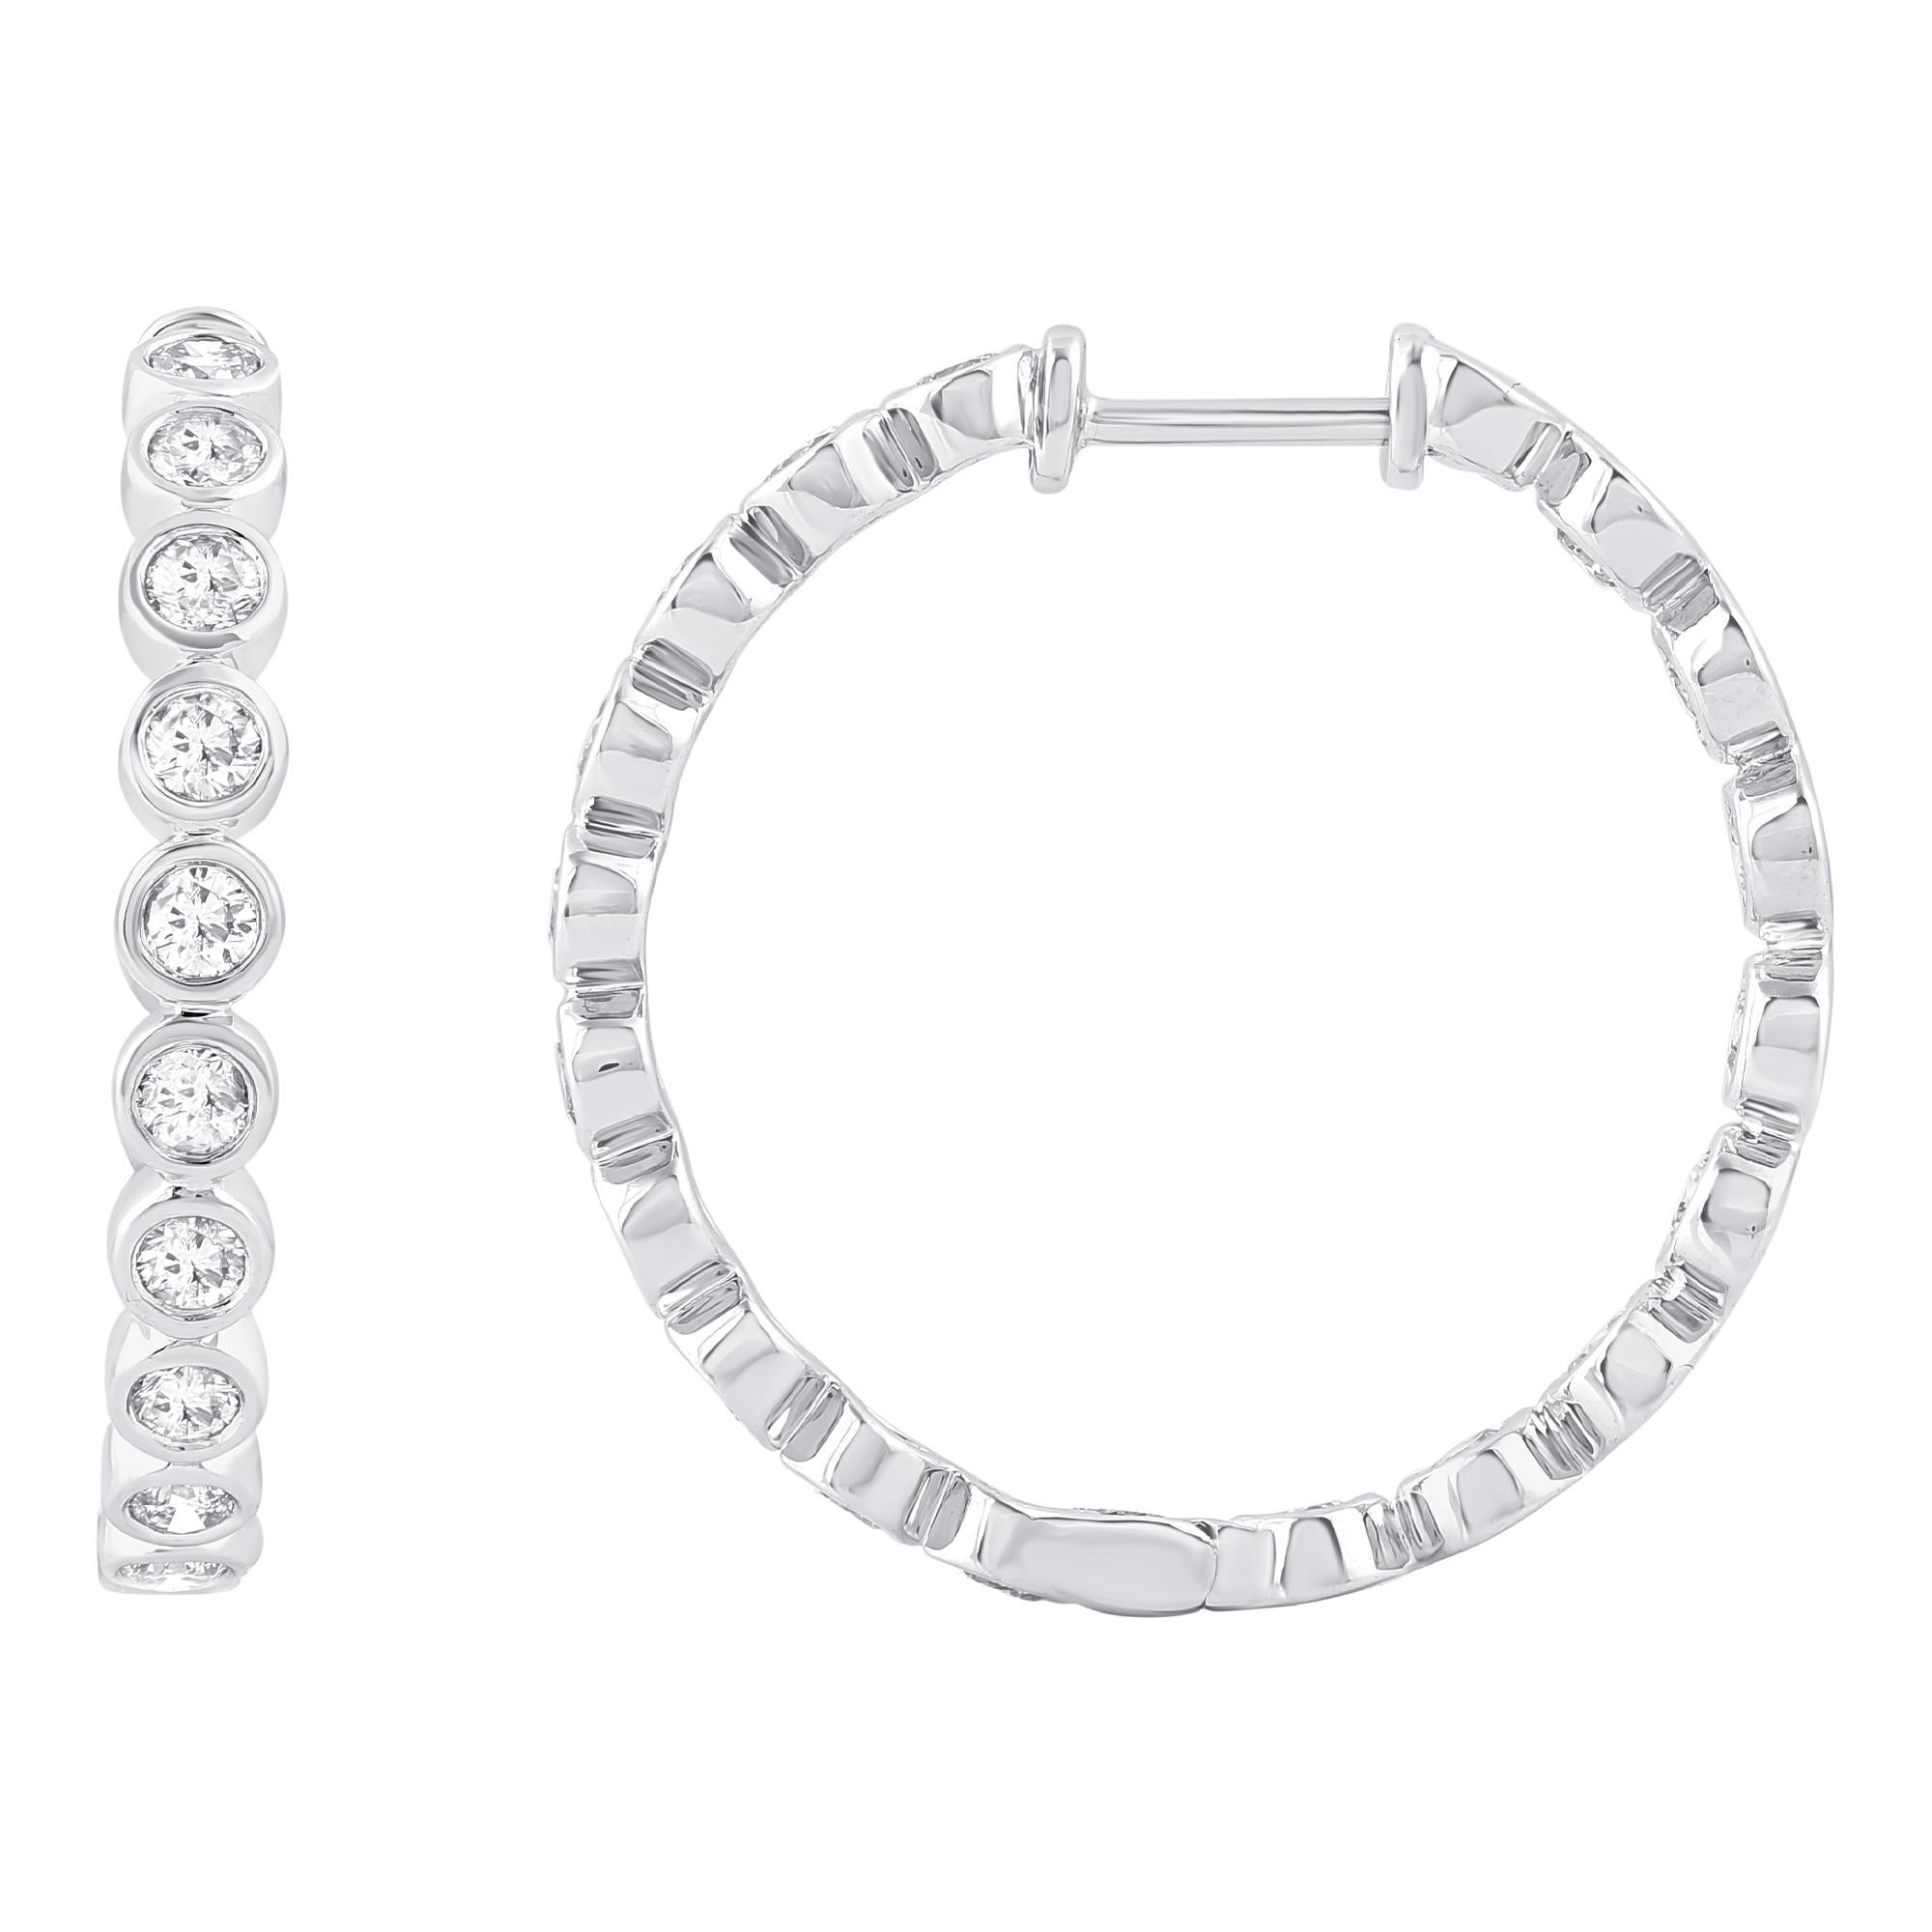 These exquisite diamond hoop earrings offer beauty equaled only to her own.These earrings are crafted in 14 karat white gold and features 36 round diamond set in bezel setting. These hoop earrings  secure comfortably with safety lock. The total